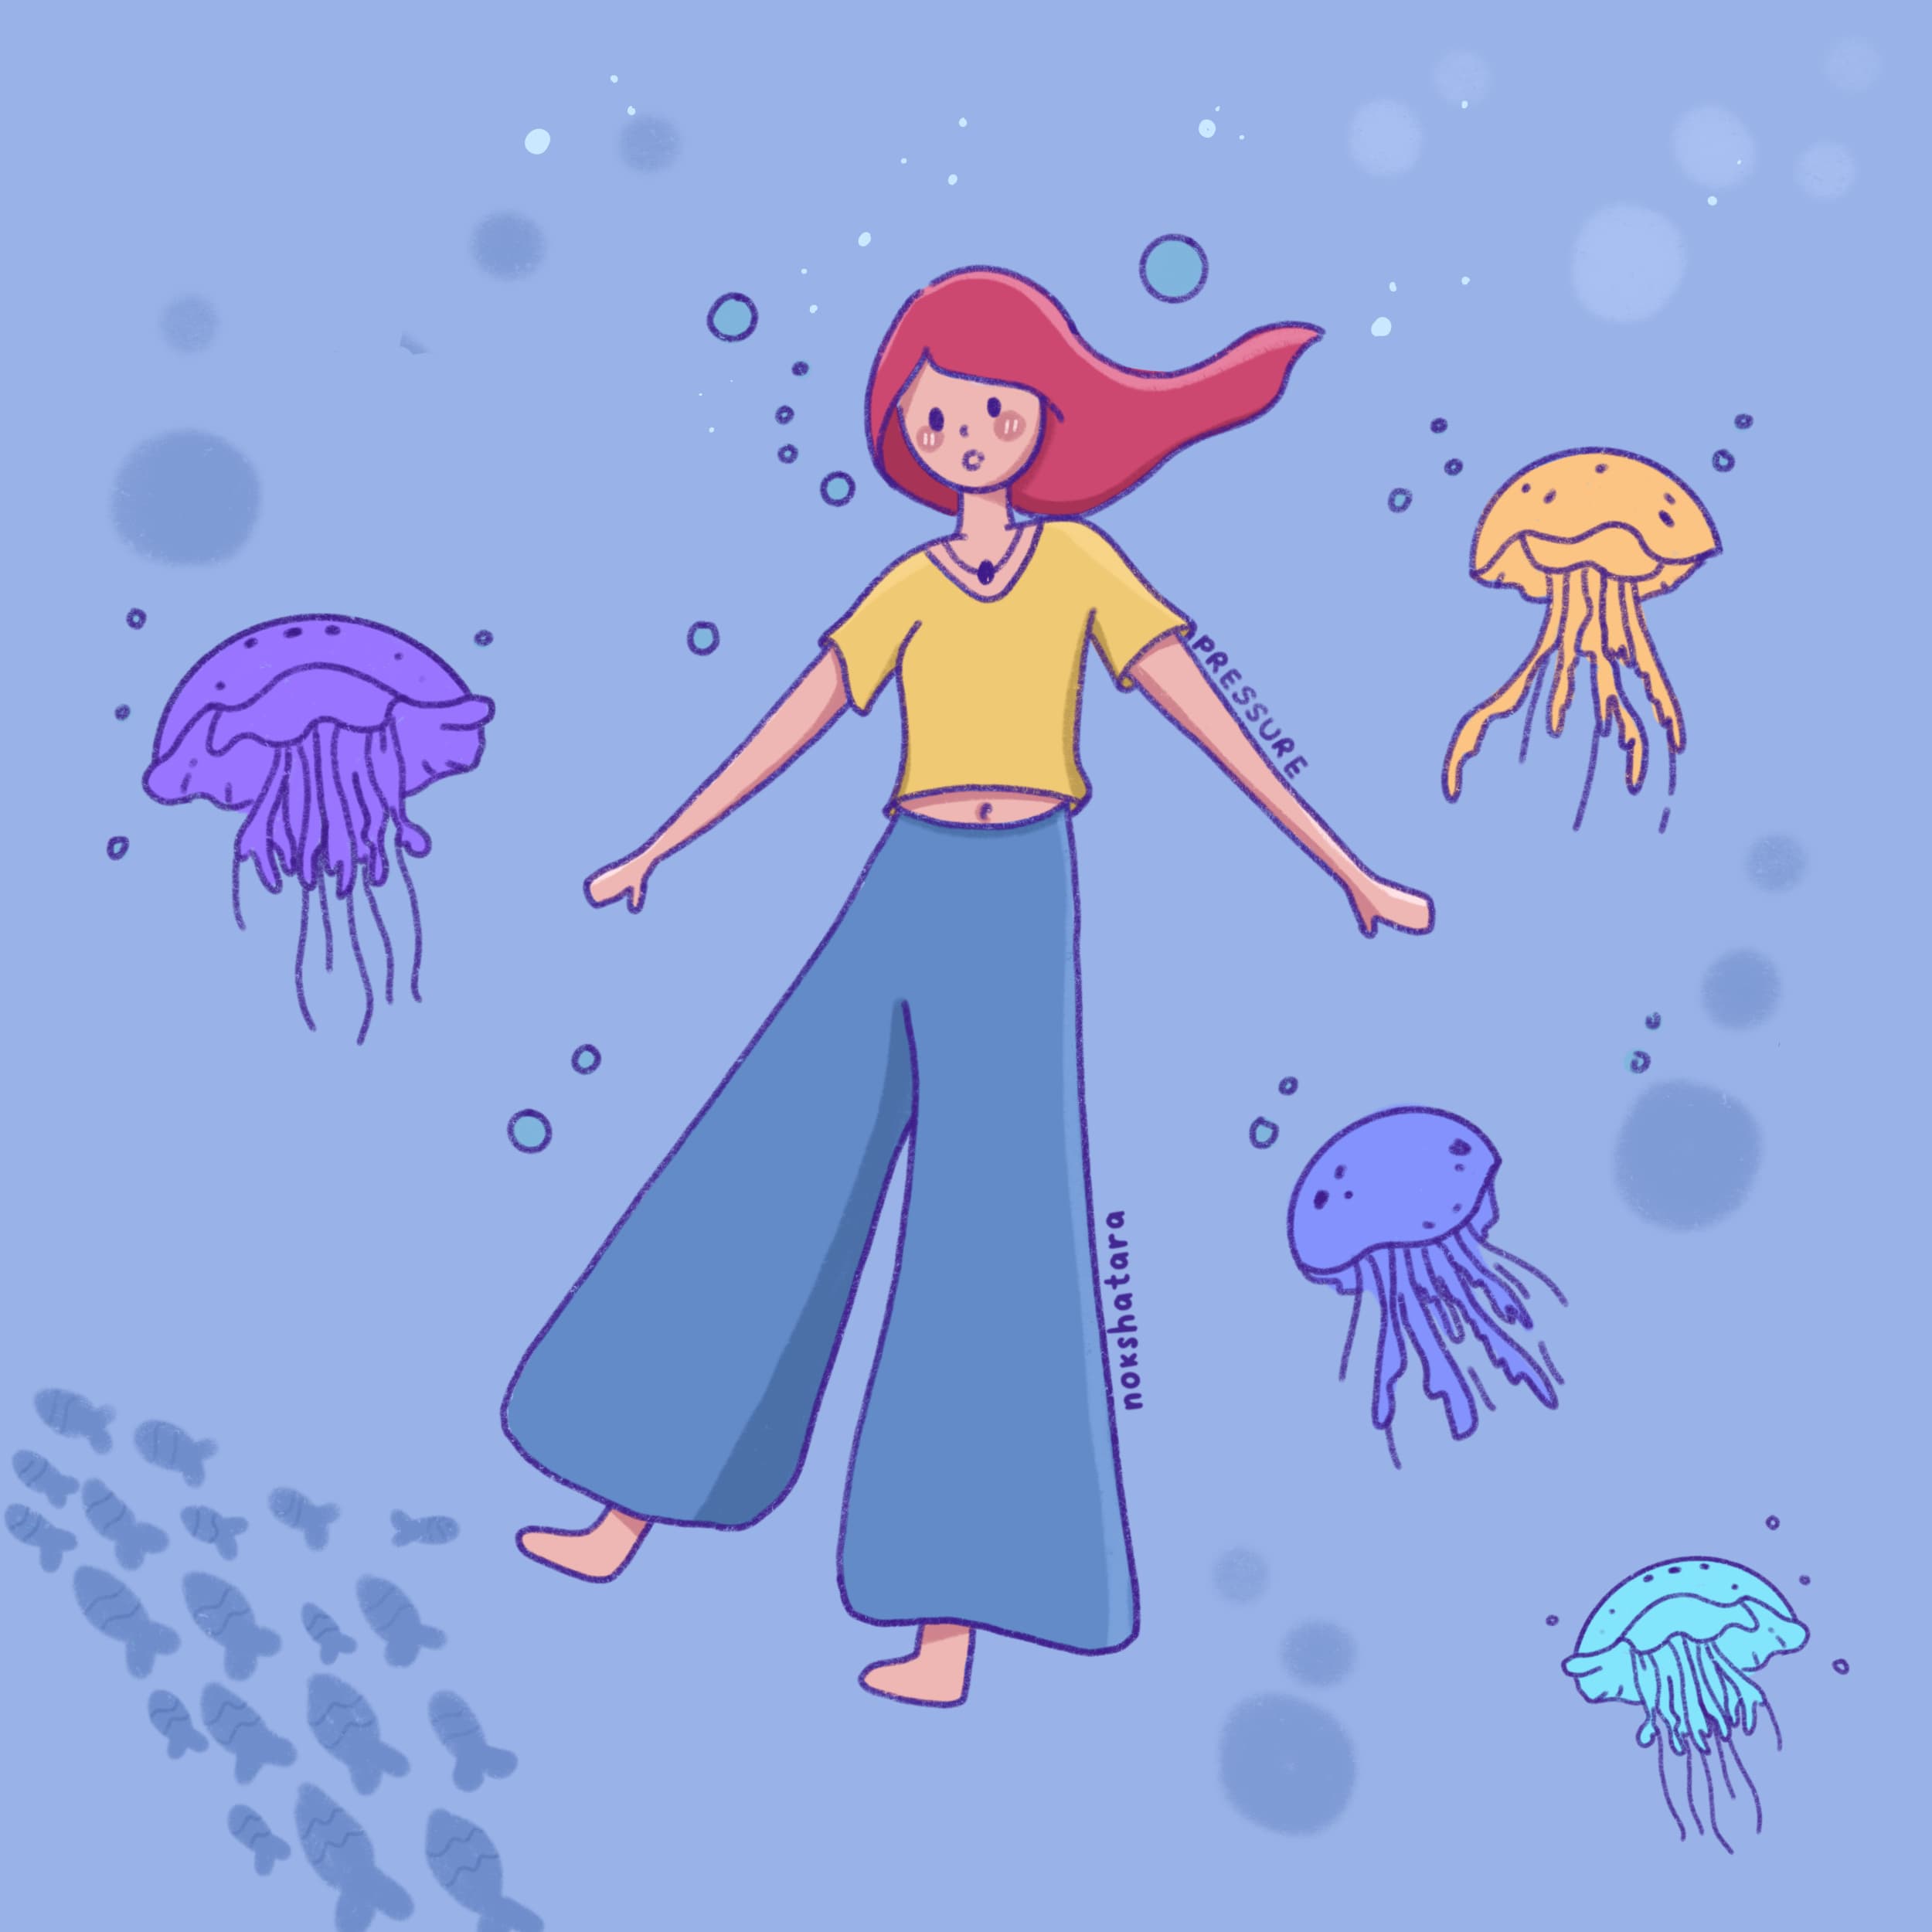 Illustration of a girl underwater with jellyfish and bubbles floating around.